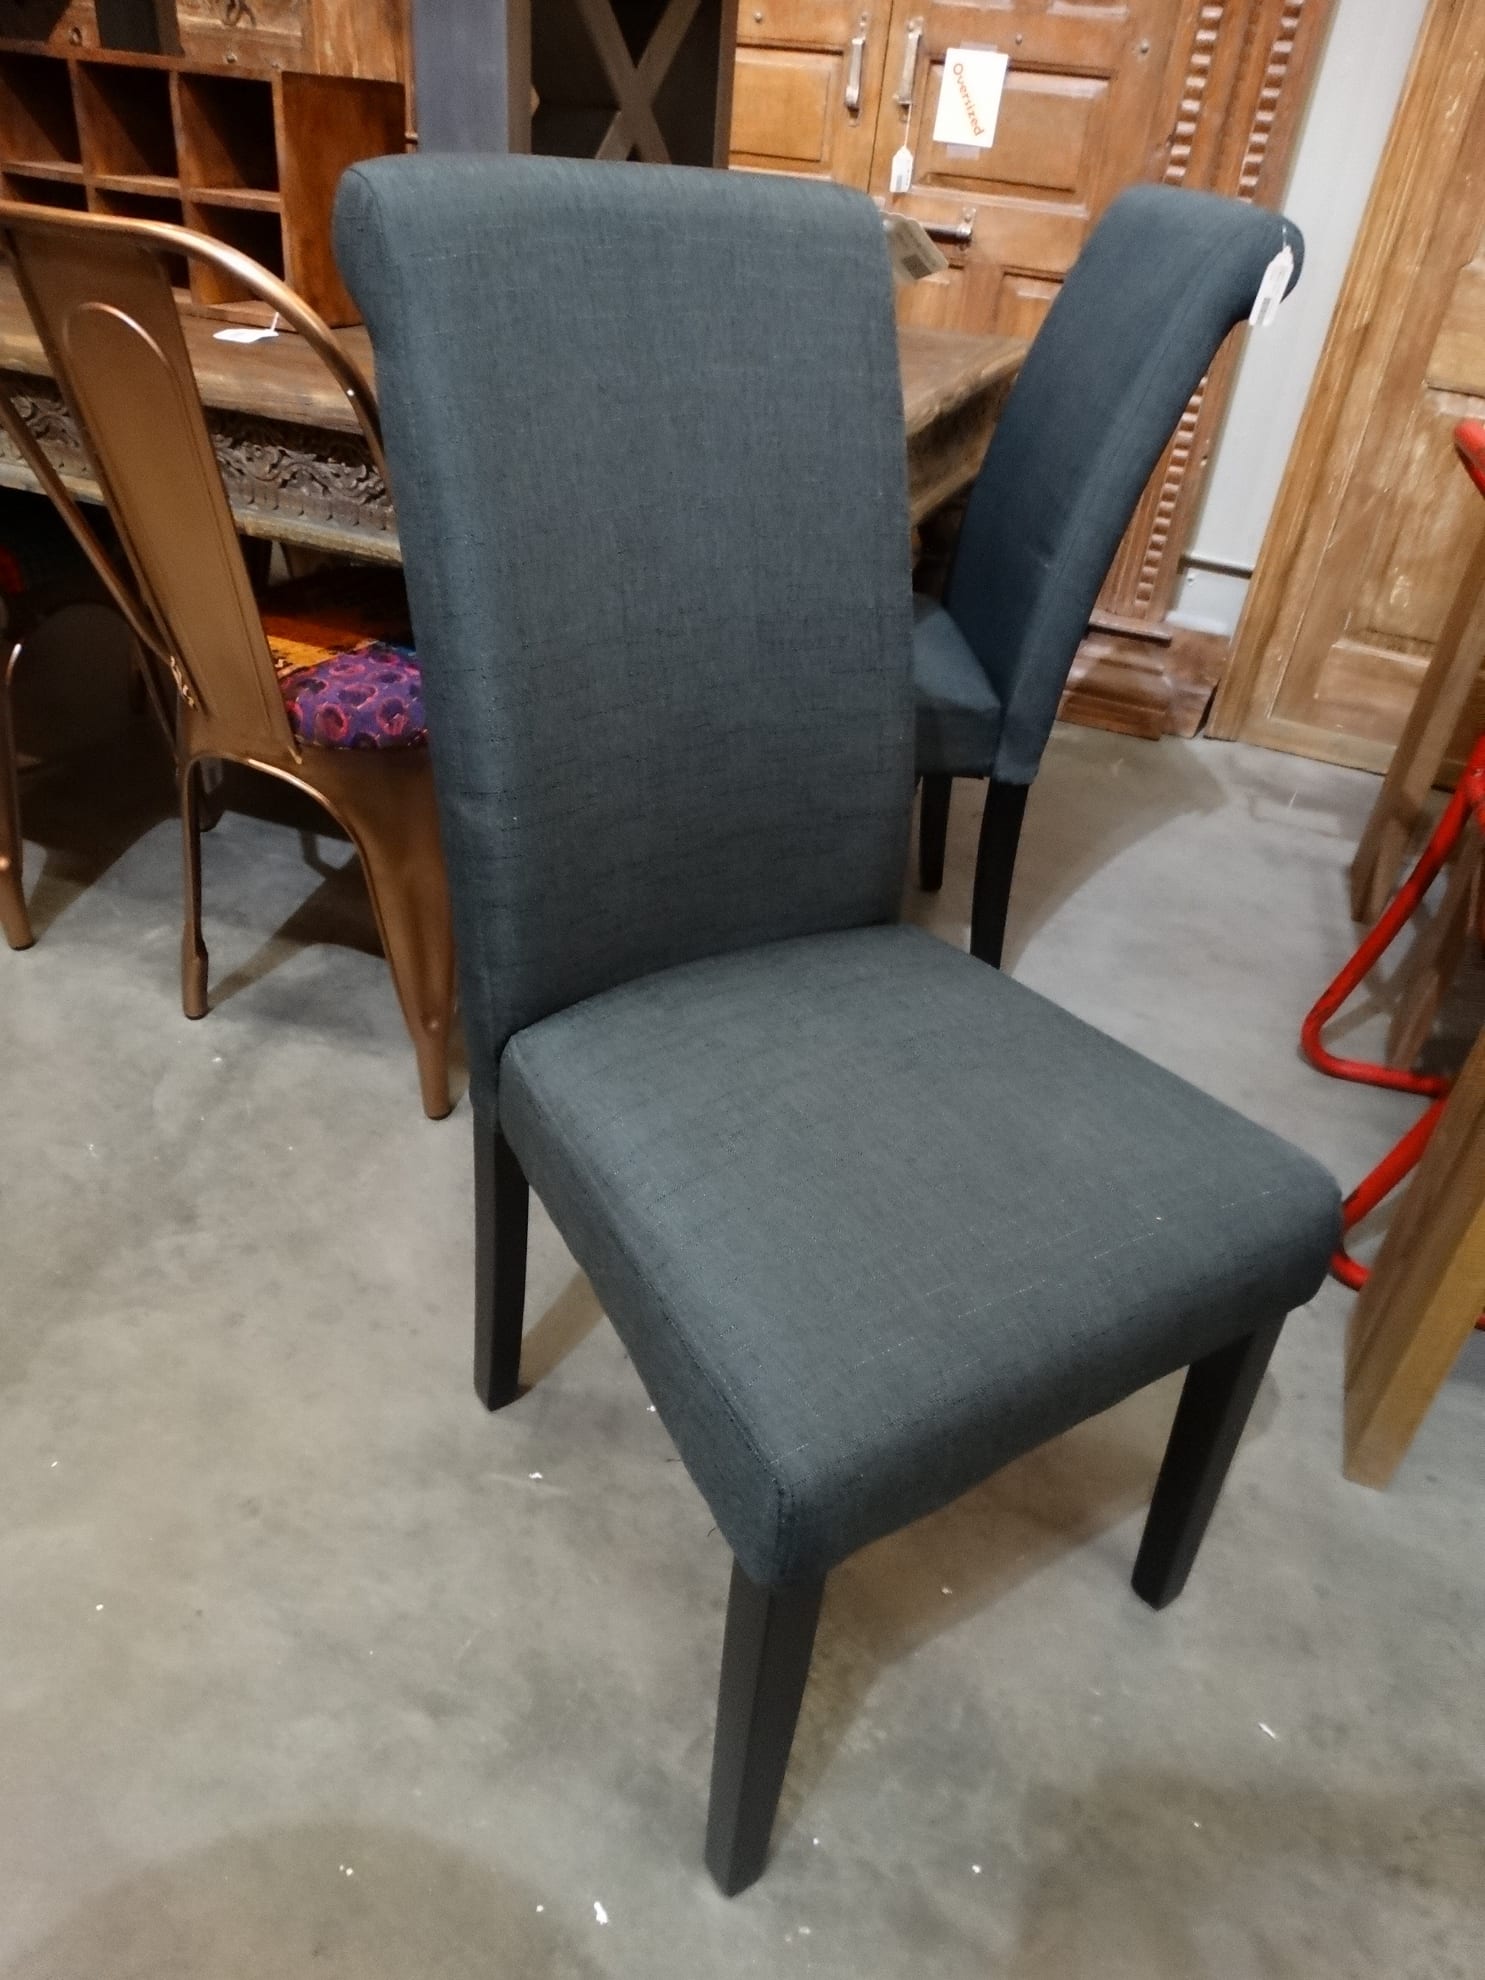 Upholstered Dining Chair adds a textile element to your space.